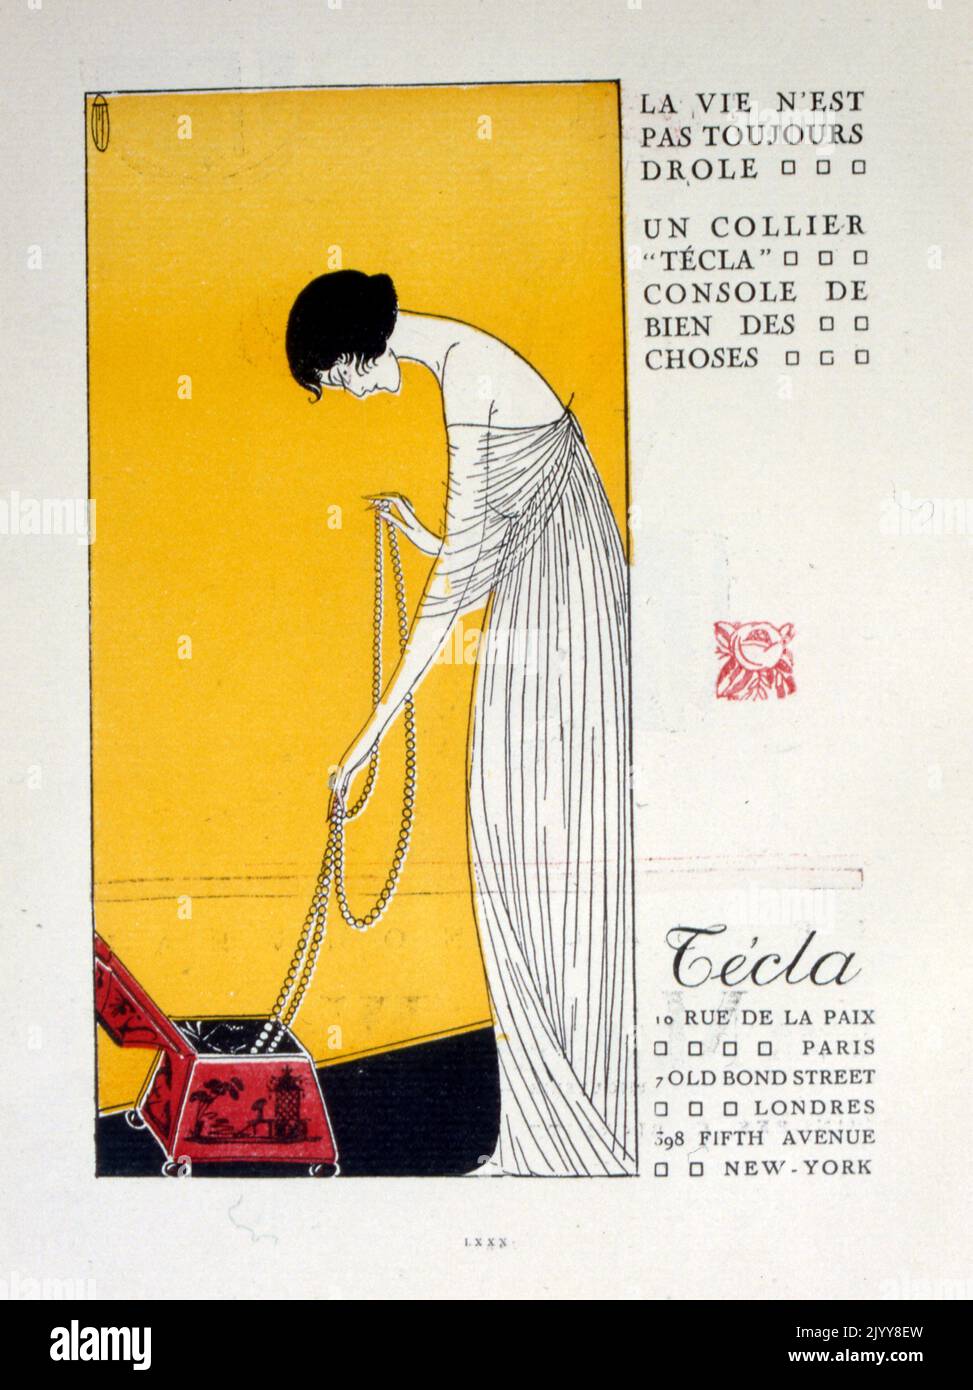 A coloured drawing of a lady pulling a long string of pearls from a jewellery box entitled 'Life is not always happy; a Tecla necklace can console things' Advertised by Tecla on Rue de la Paix, Paris. Stock Photo